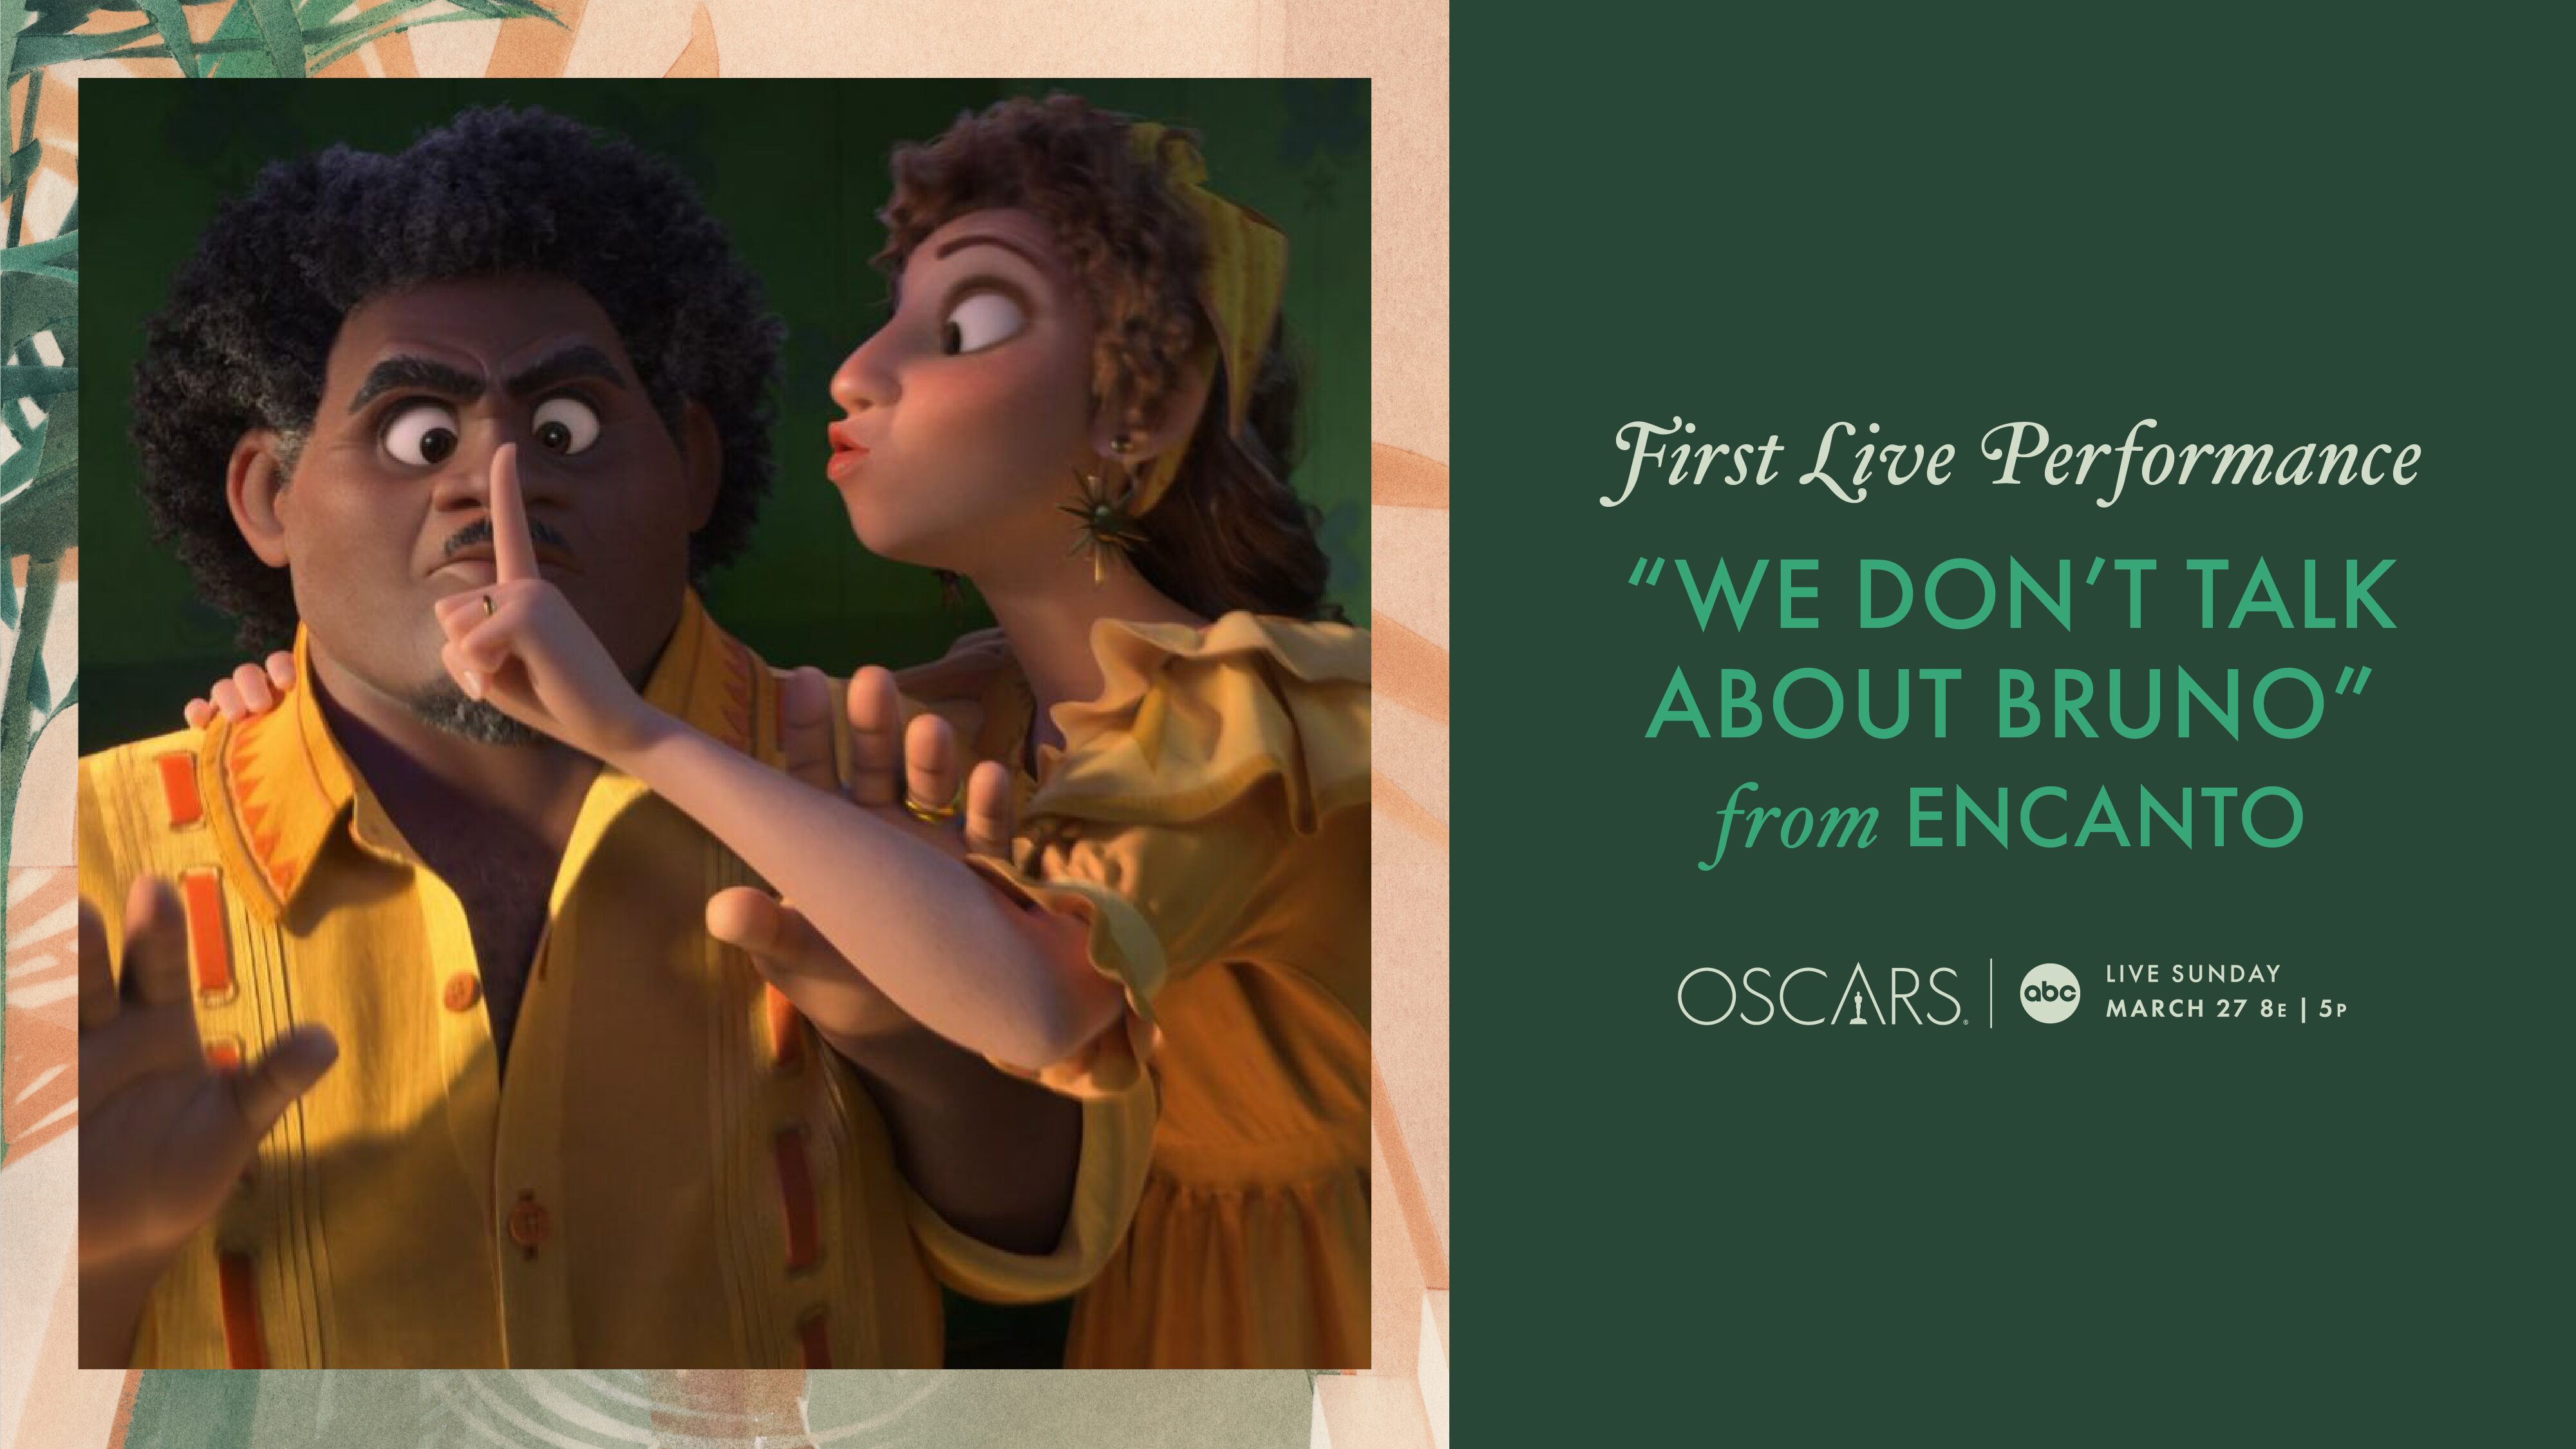 94th Oscars To Feature First Live Performance Of “we Dont Talk About